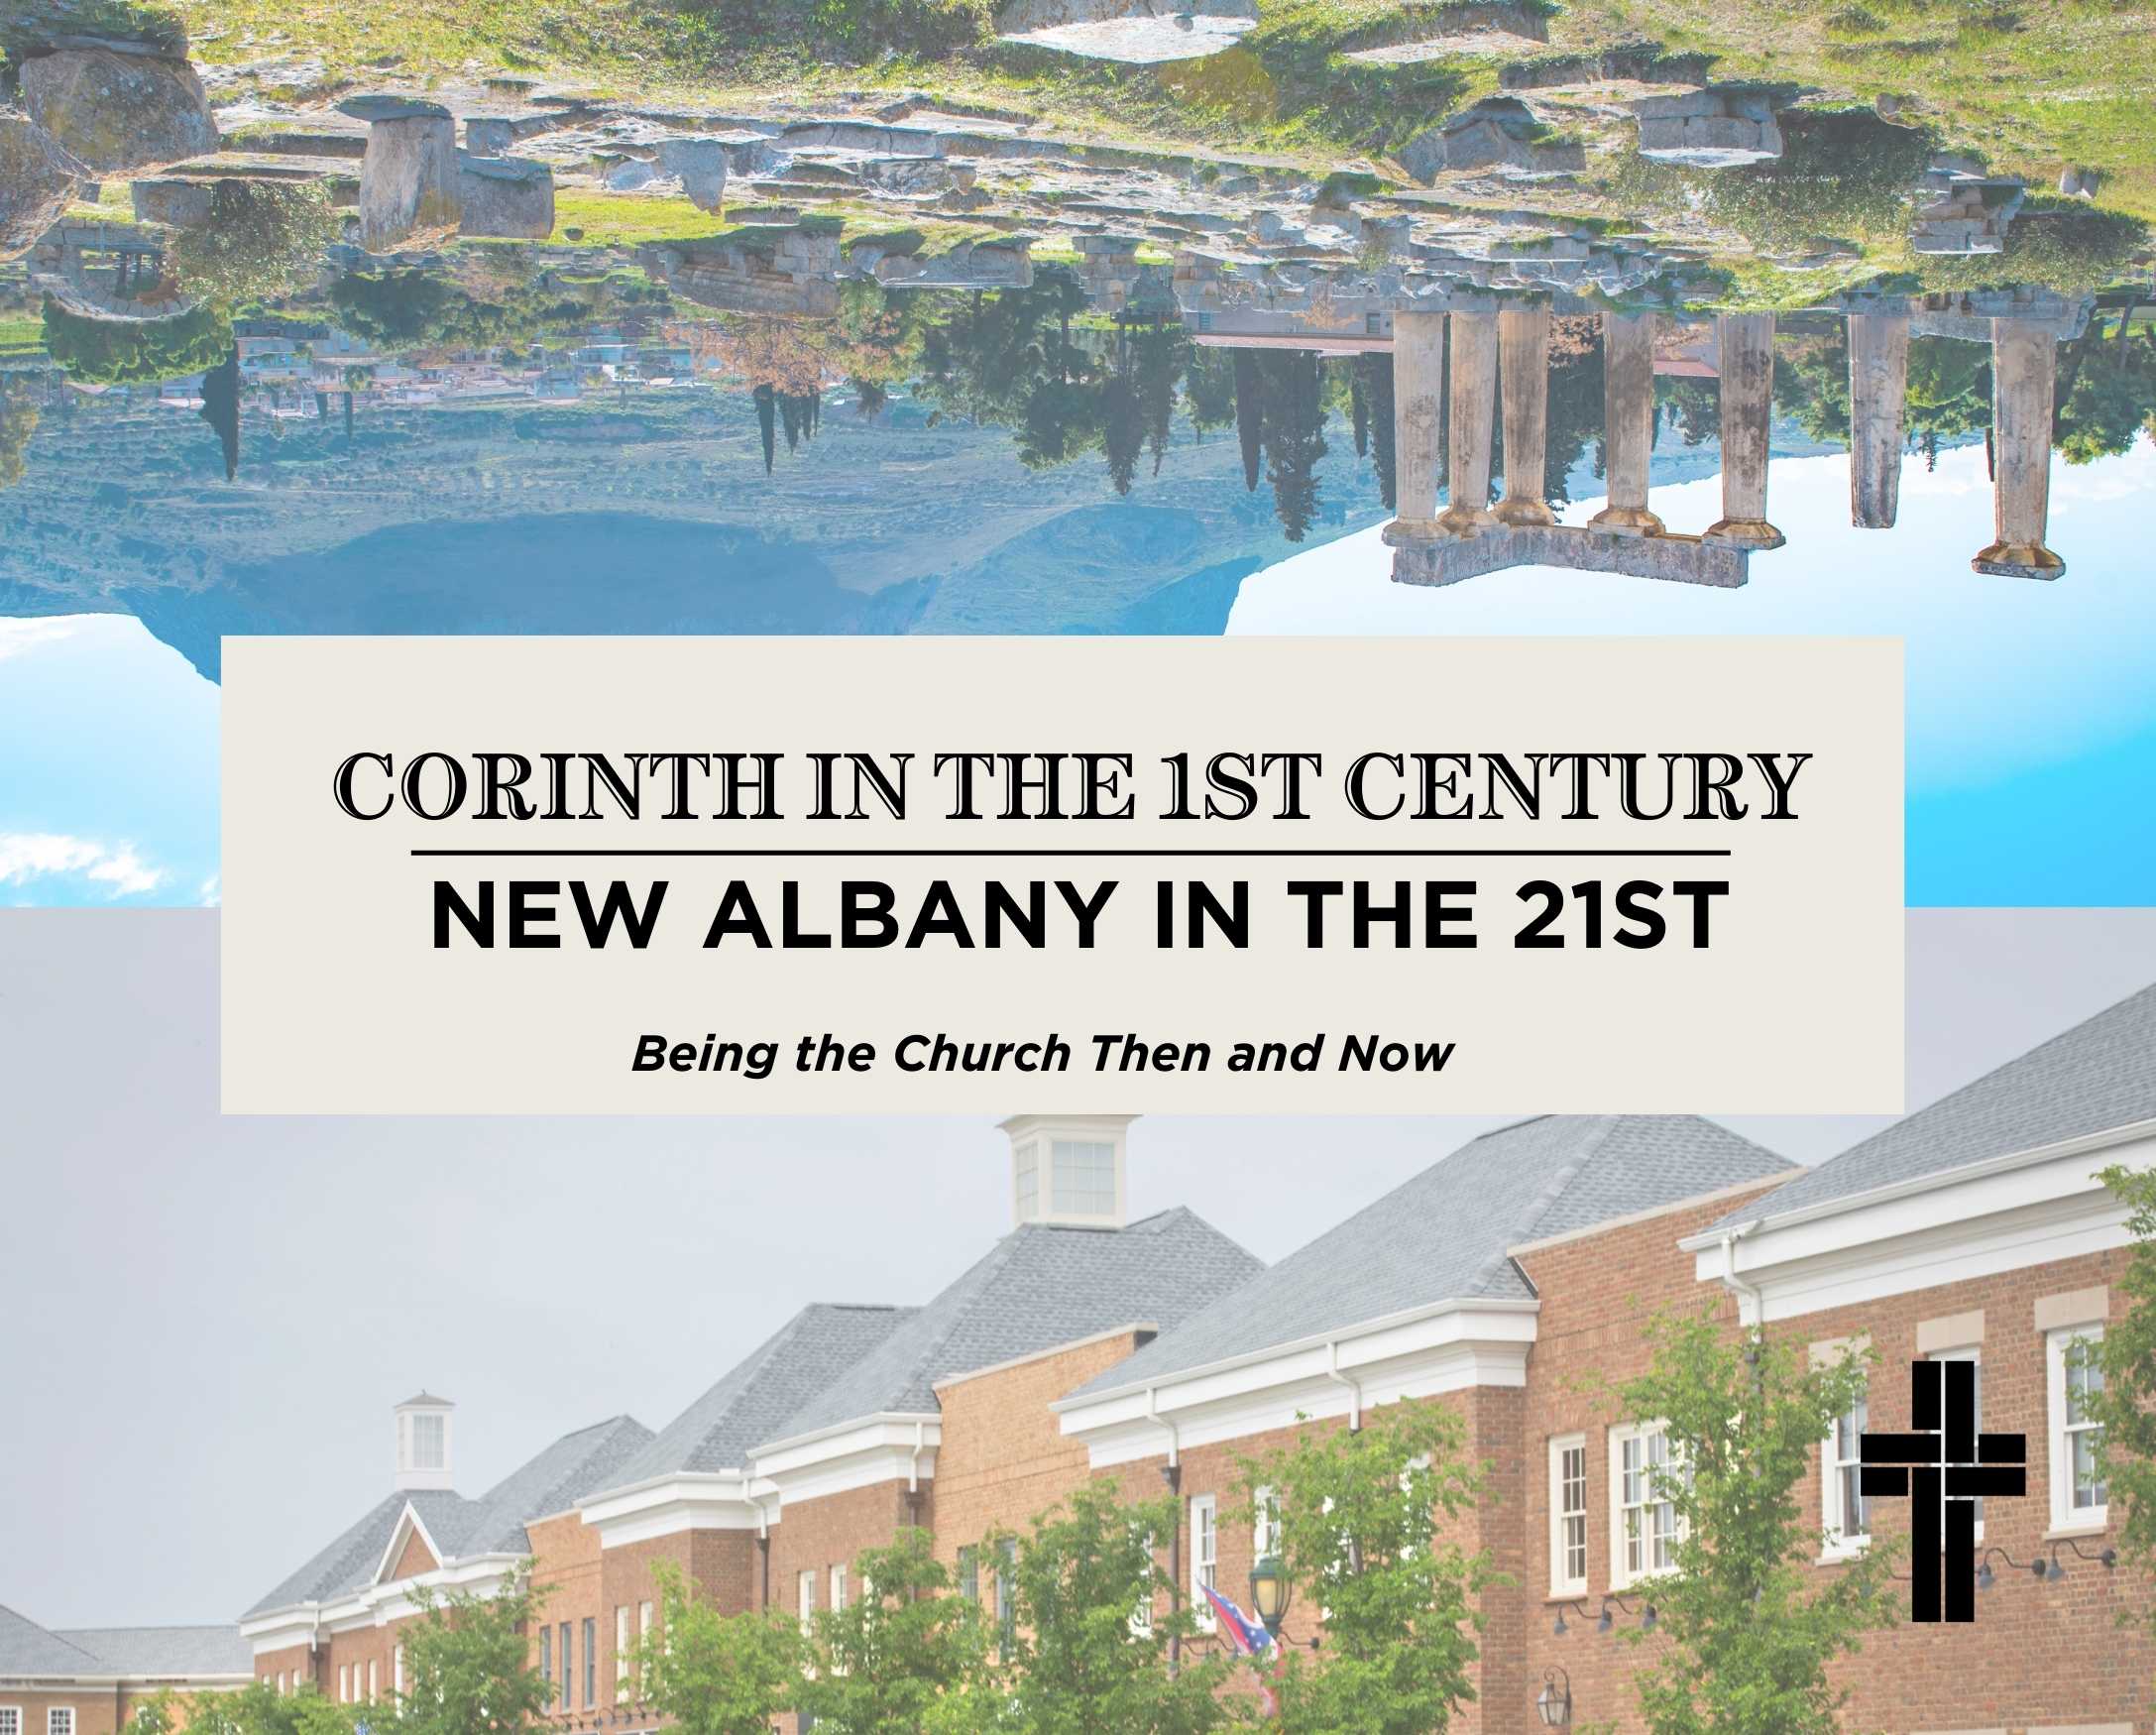 Corinth in the 1st Century, New Albany in the 21st: Judging One Another